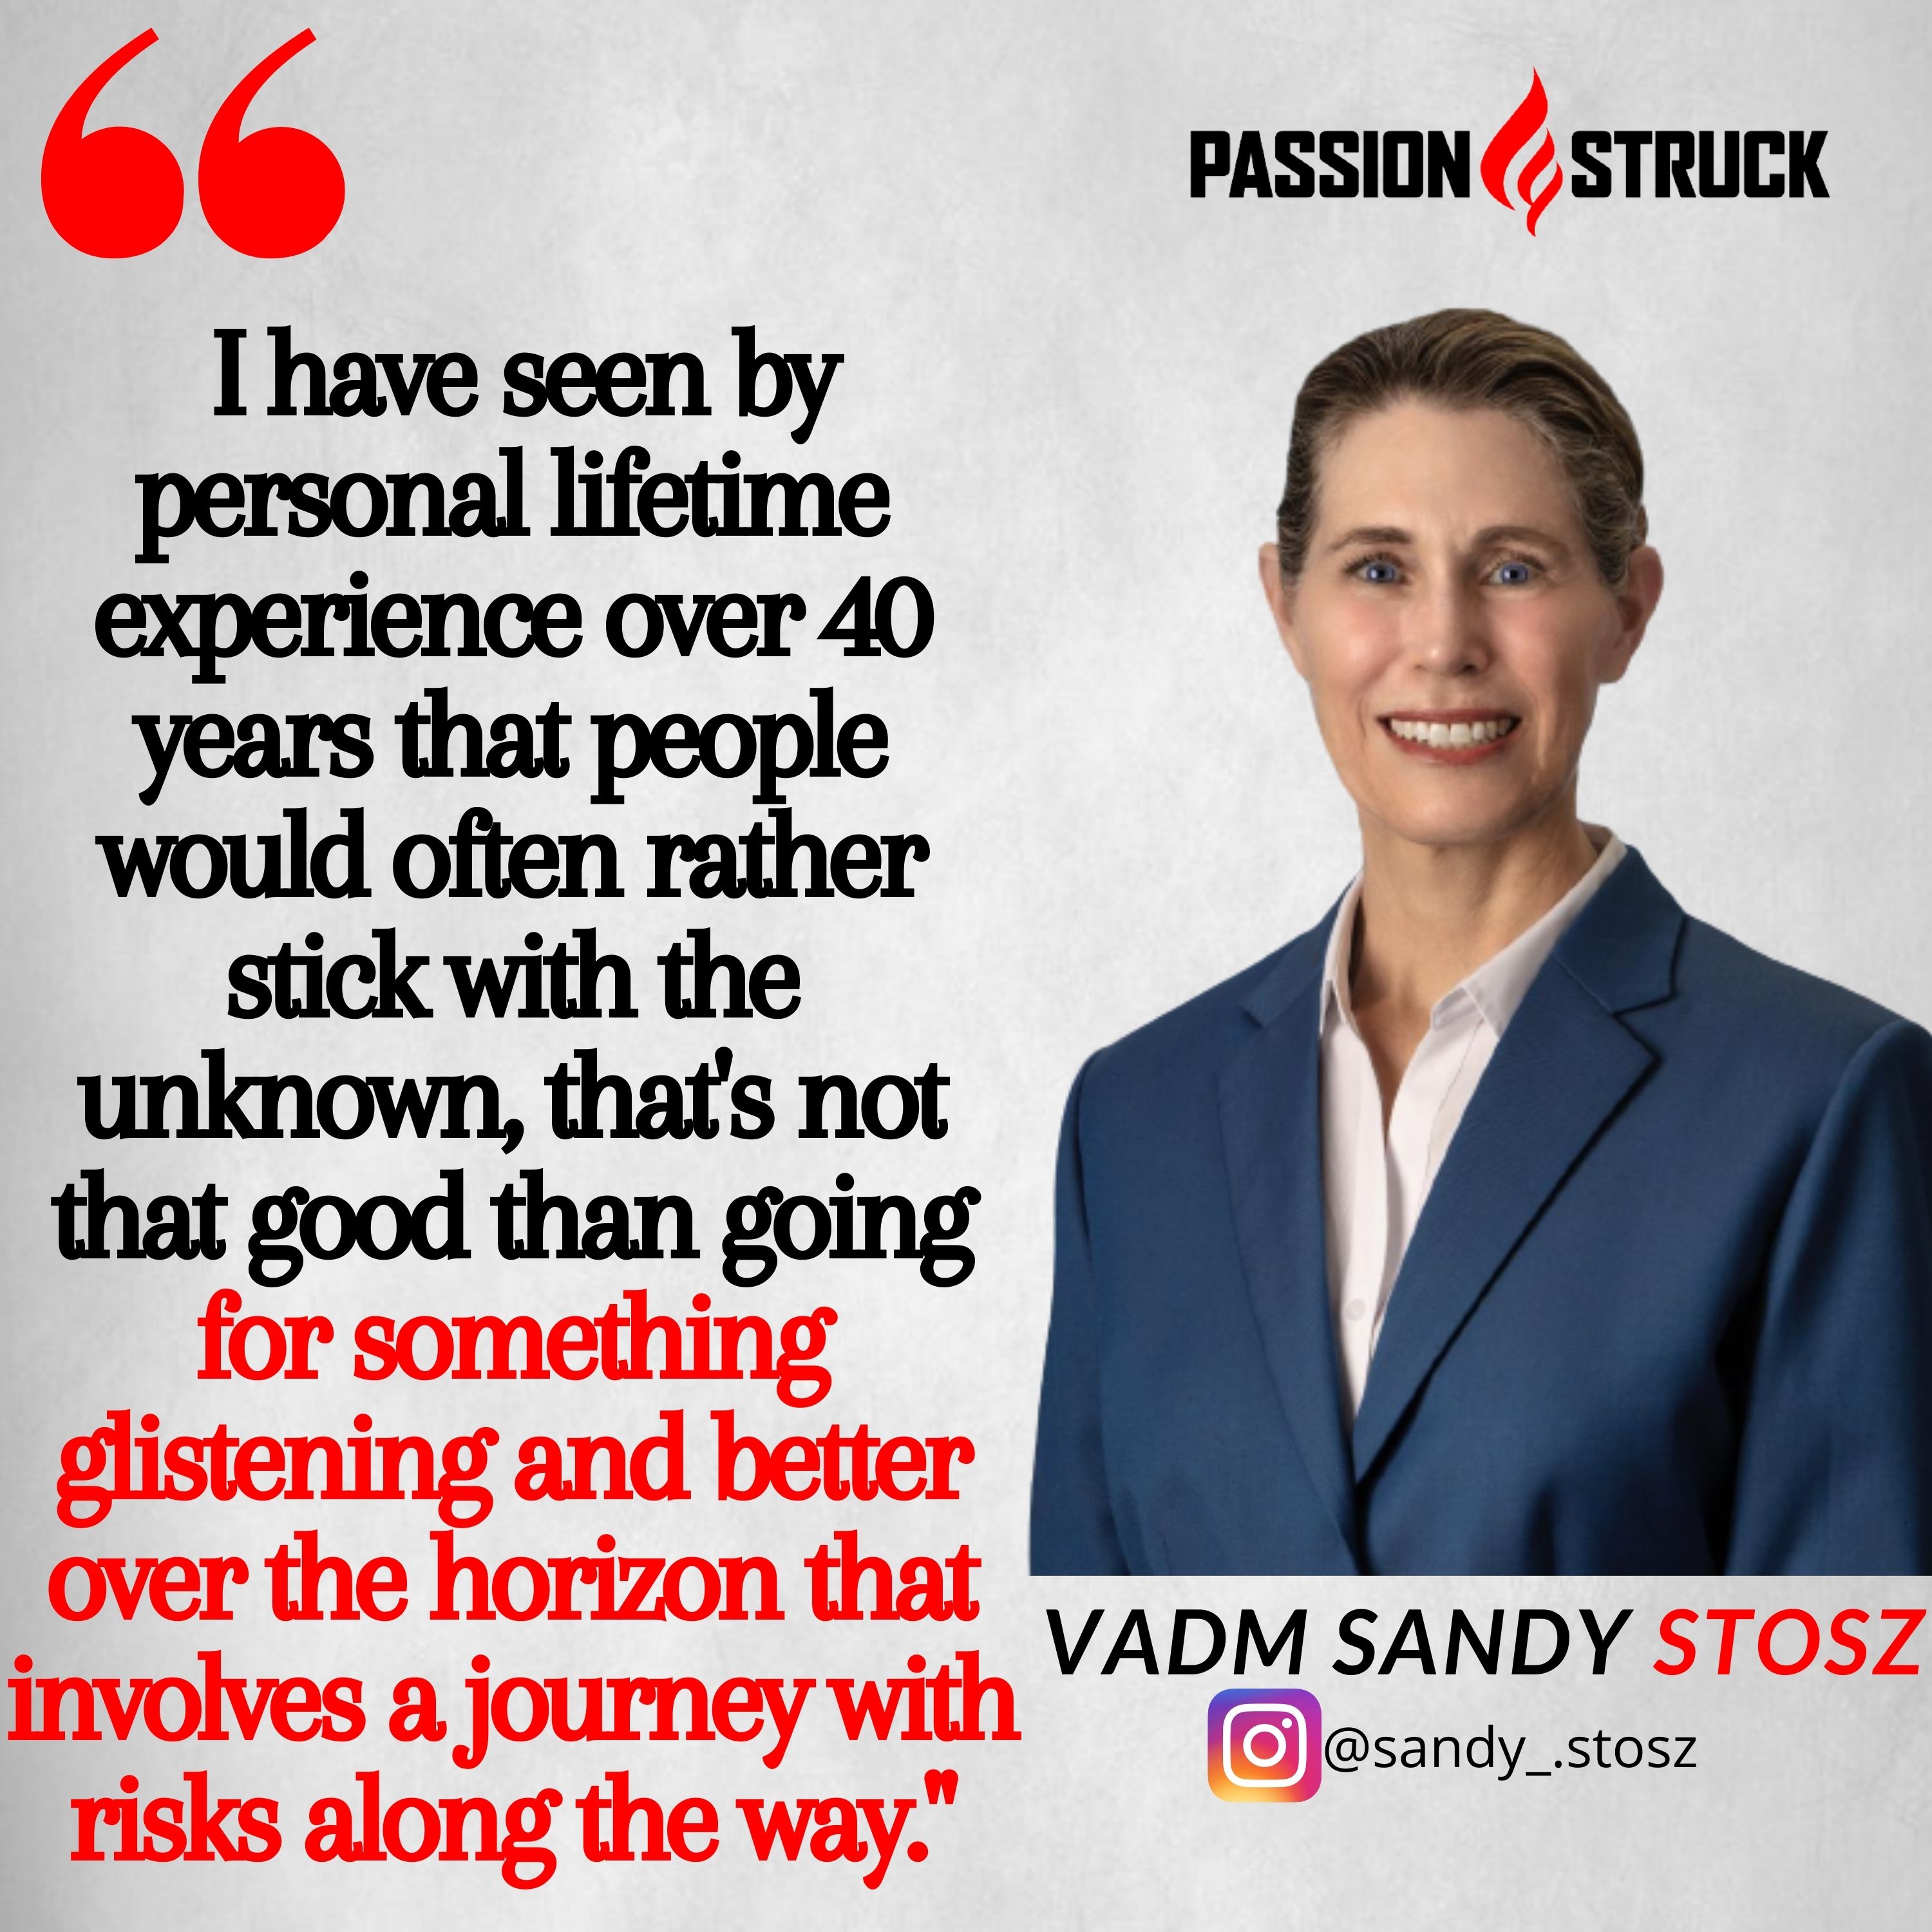 Quote by Sandy Stosz' "I have seen by personal lifetime experience over 40 years that people would often rather stick with the unknown, that's not that good than going for something glistening and better over the horizon that involves a journey with risks along the way."  for passion struck